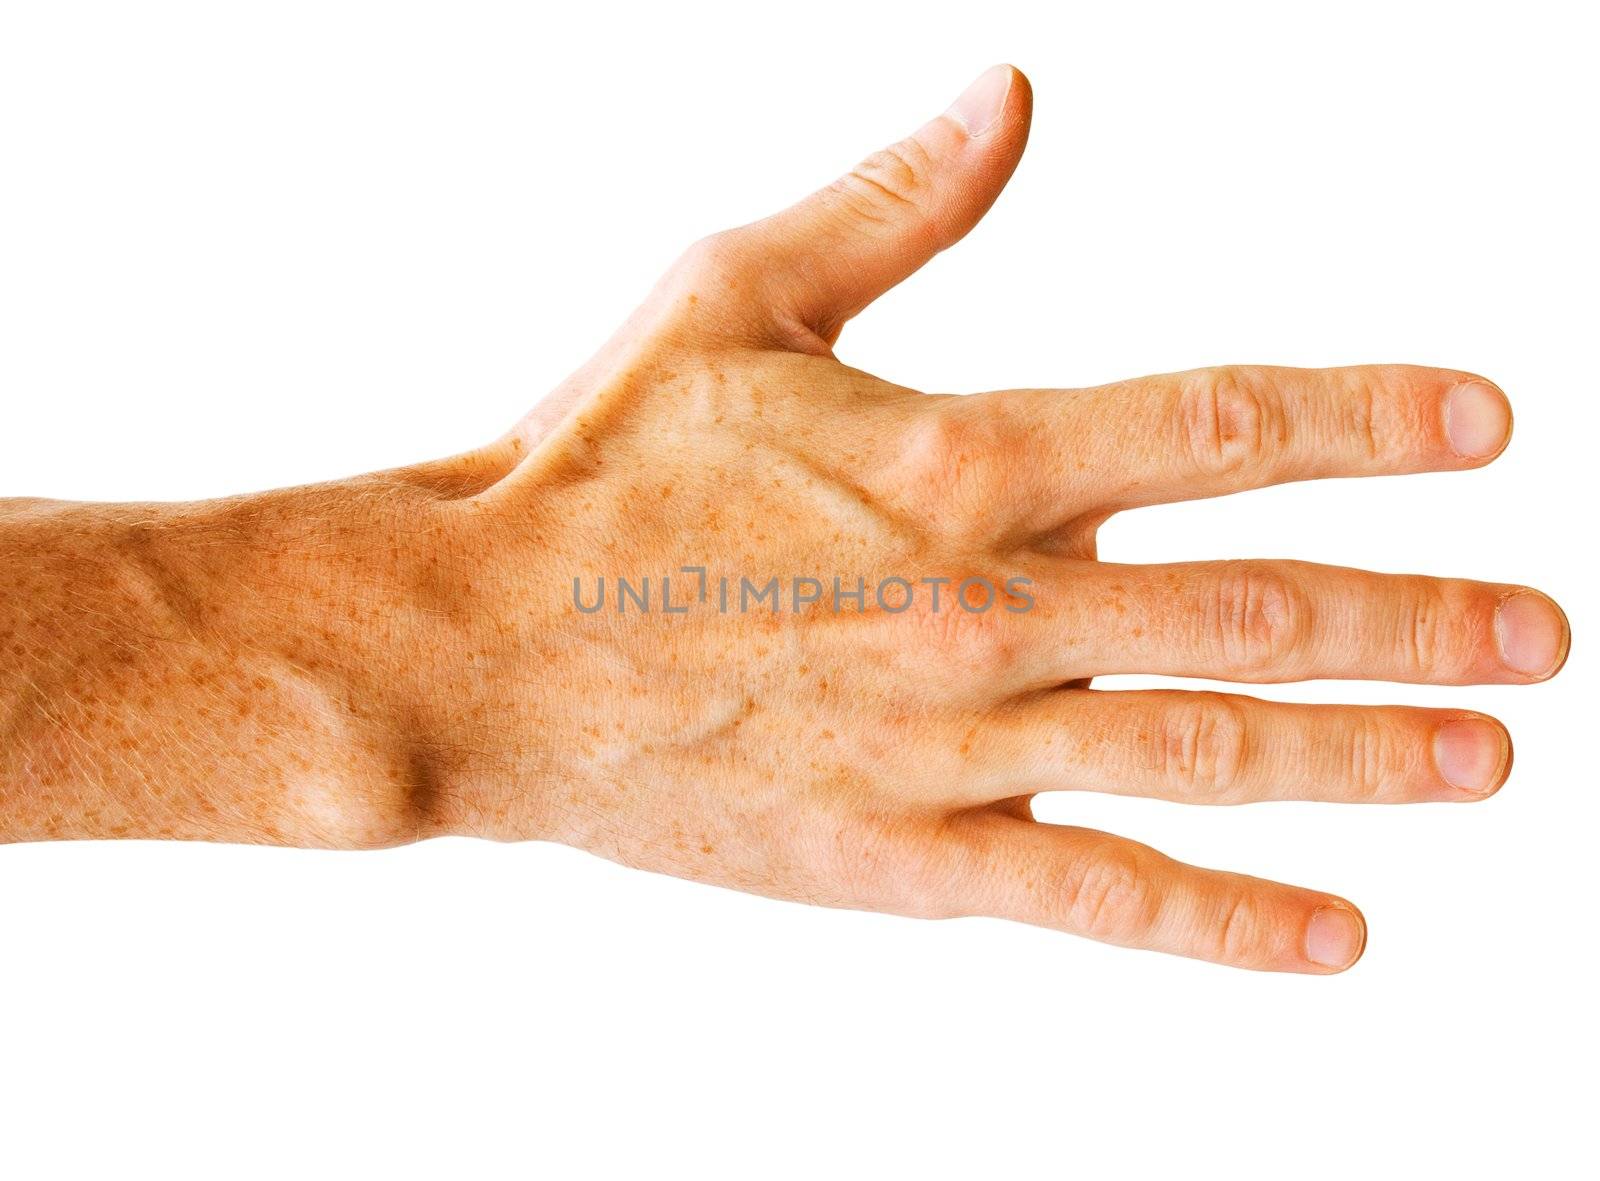 The hand isolated on a white background